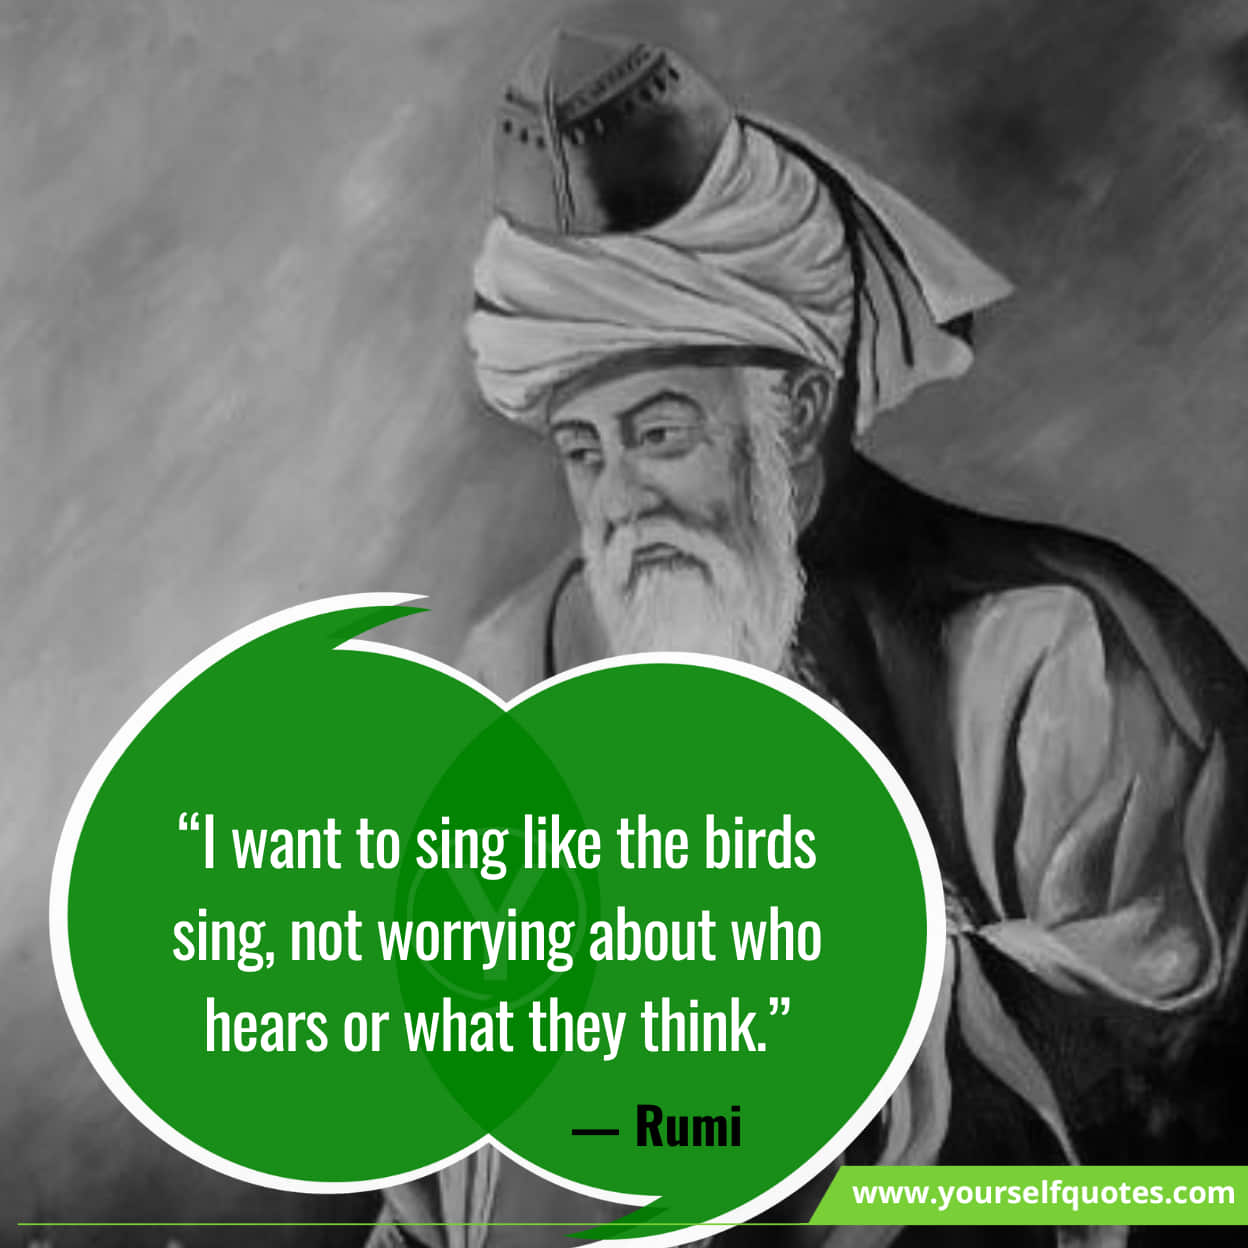 Rumi's teachings on mindfulness and presence